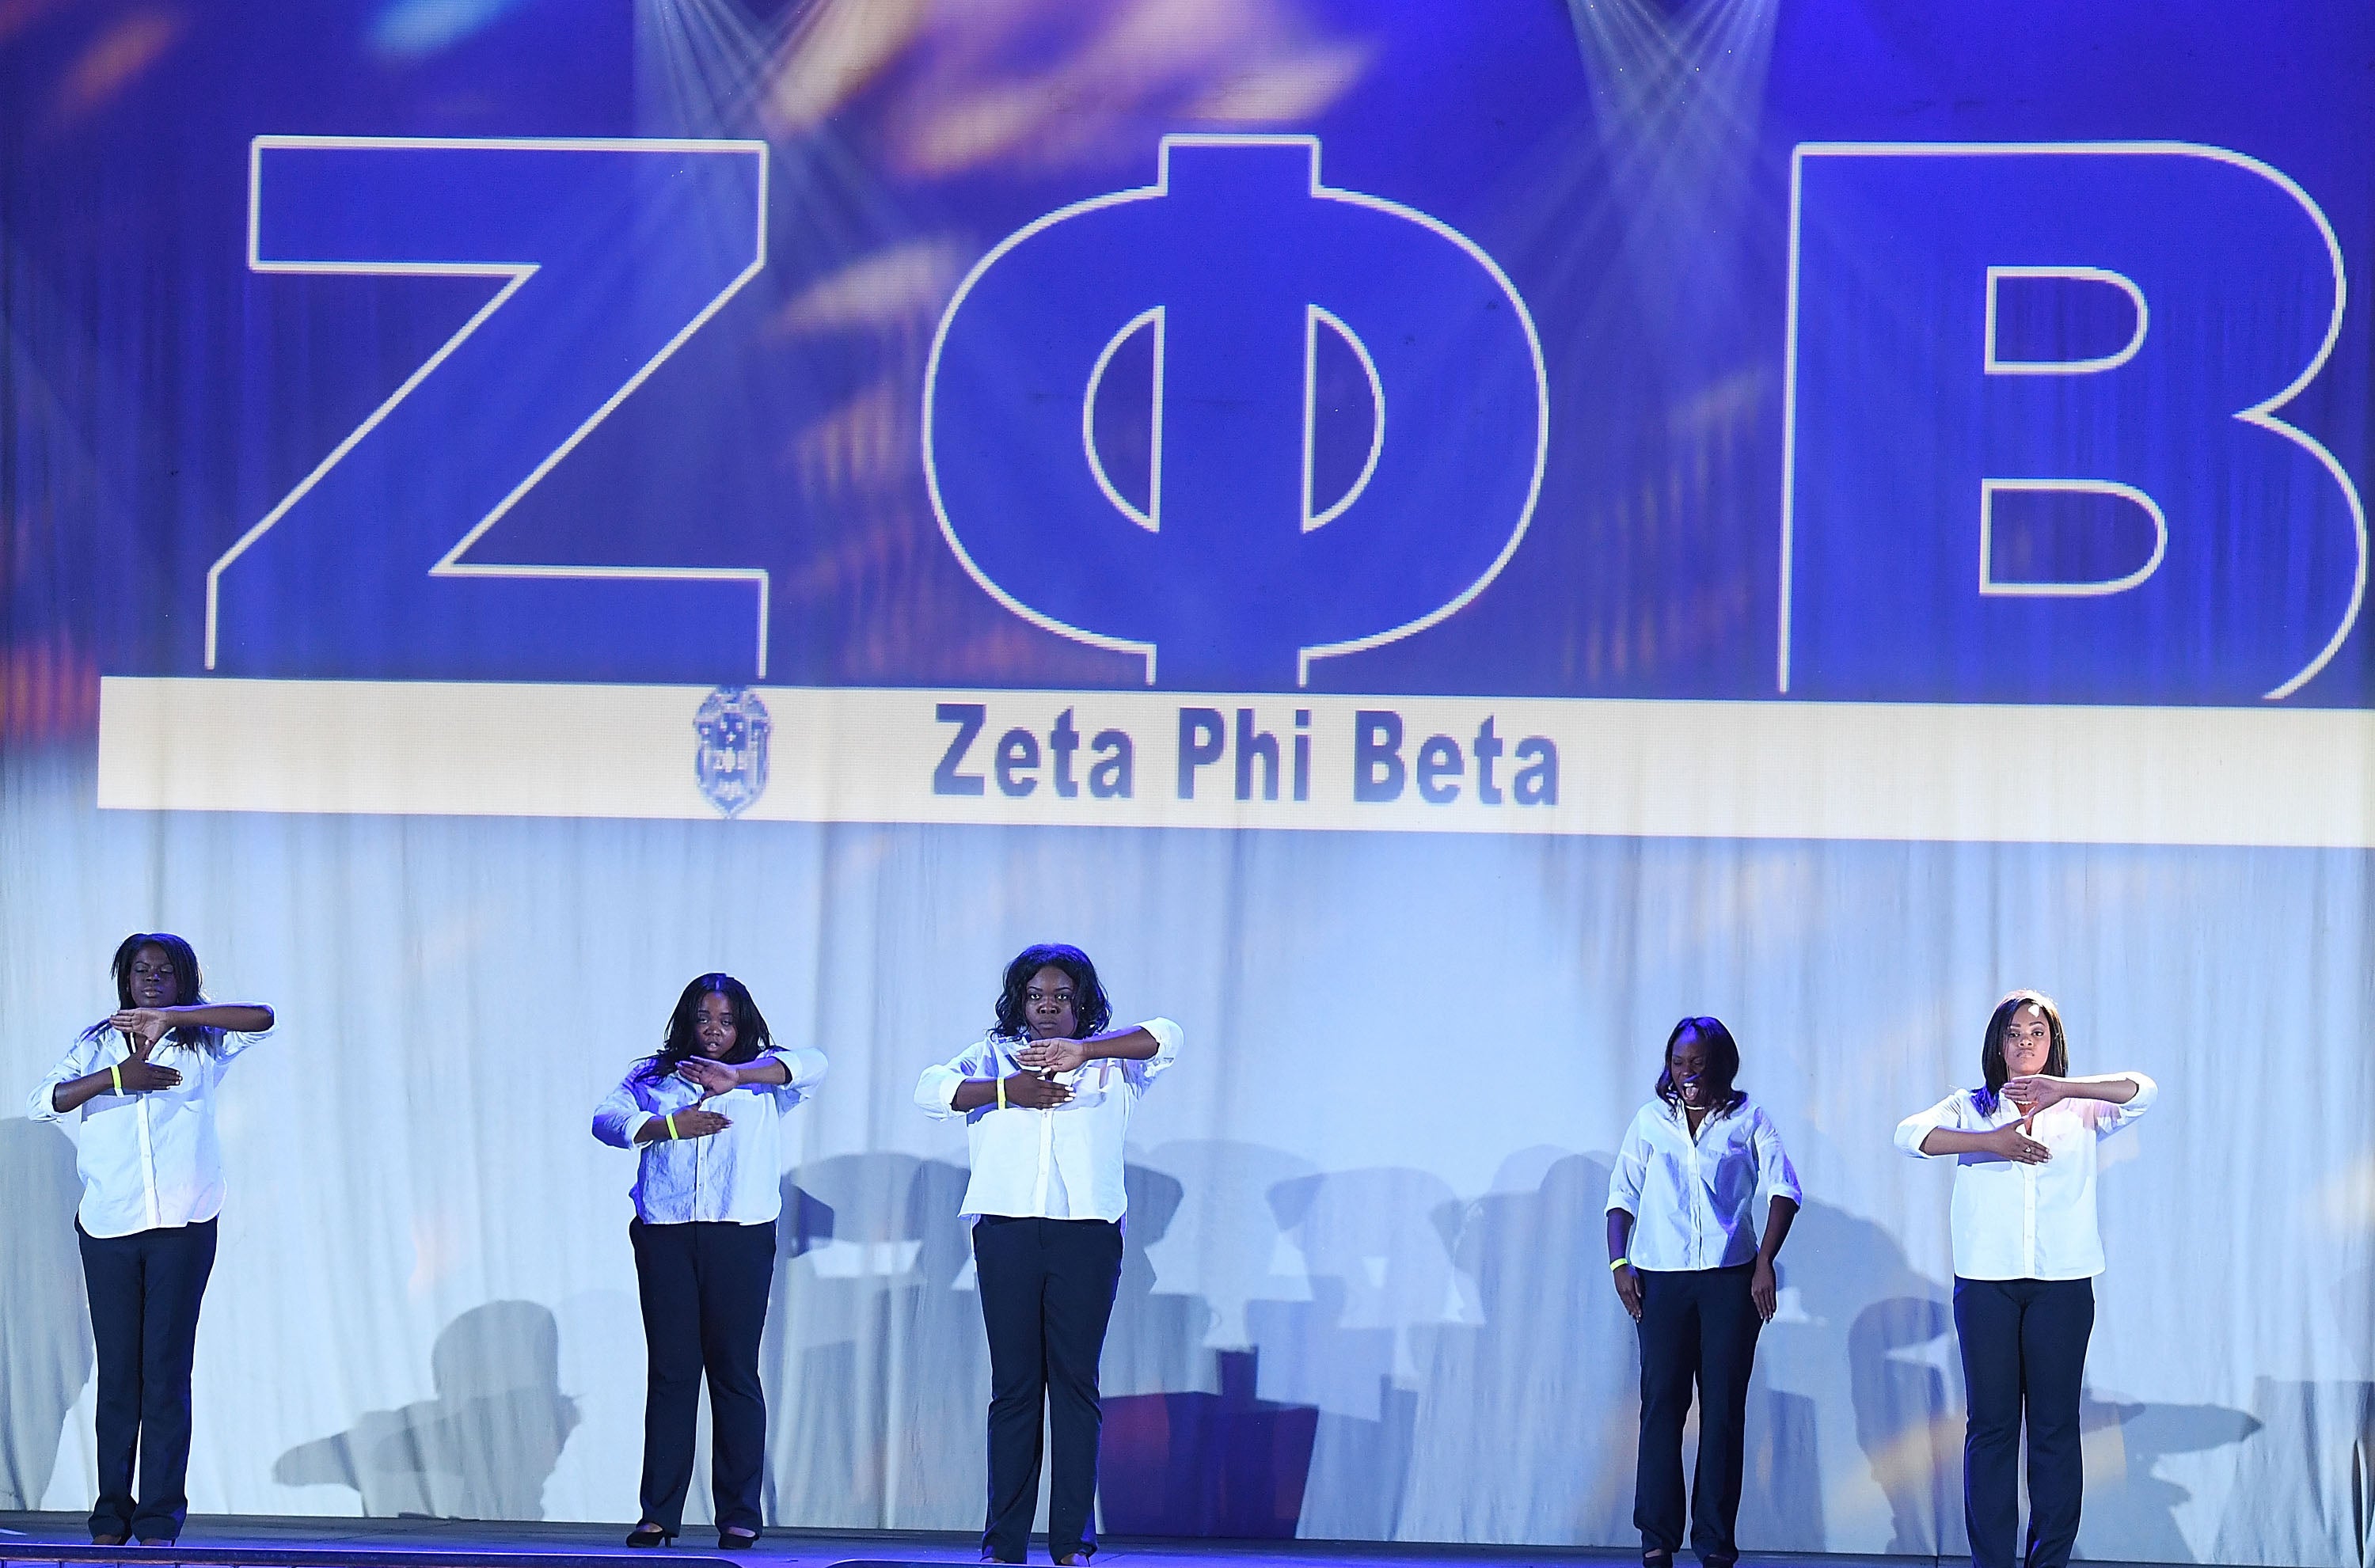 Exclusive: Zeta Phi Beta Sorority Responds To Allegations About Banning Trans Women From Membership